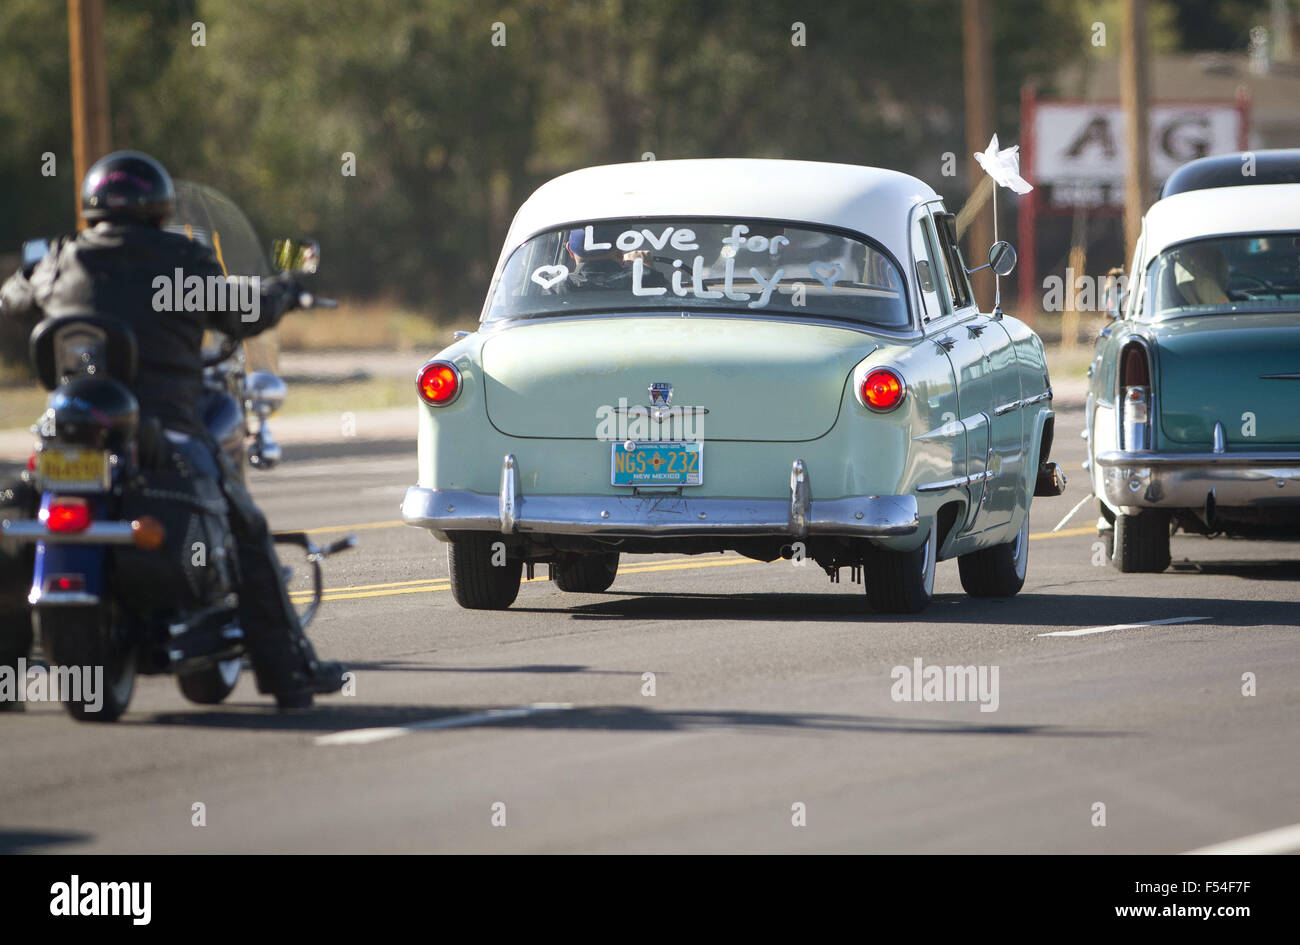 Usa. 27th Oct, 2015. 102715.After the funeral of four-year-old Lilly Garcia at Nativity of the Blessed Virgin Mary Church, cars in the processional, headed to Sunset Memorial Park for the graveside service, drove with the message Love for Lilly, Tuesday, Oct. 27, 2015, in Albuquerque, N.M. Lilly was shot and killed on the freeway as the result of road rage. © Albuquerque Journal/ZUMA Wire/Alamy Live News Stock Photo